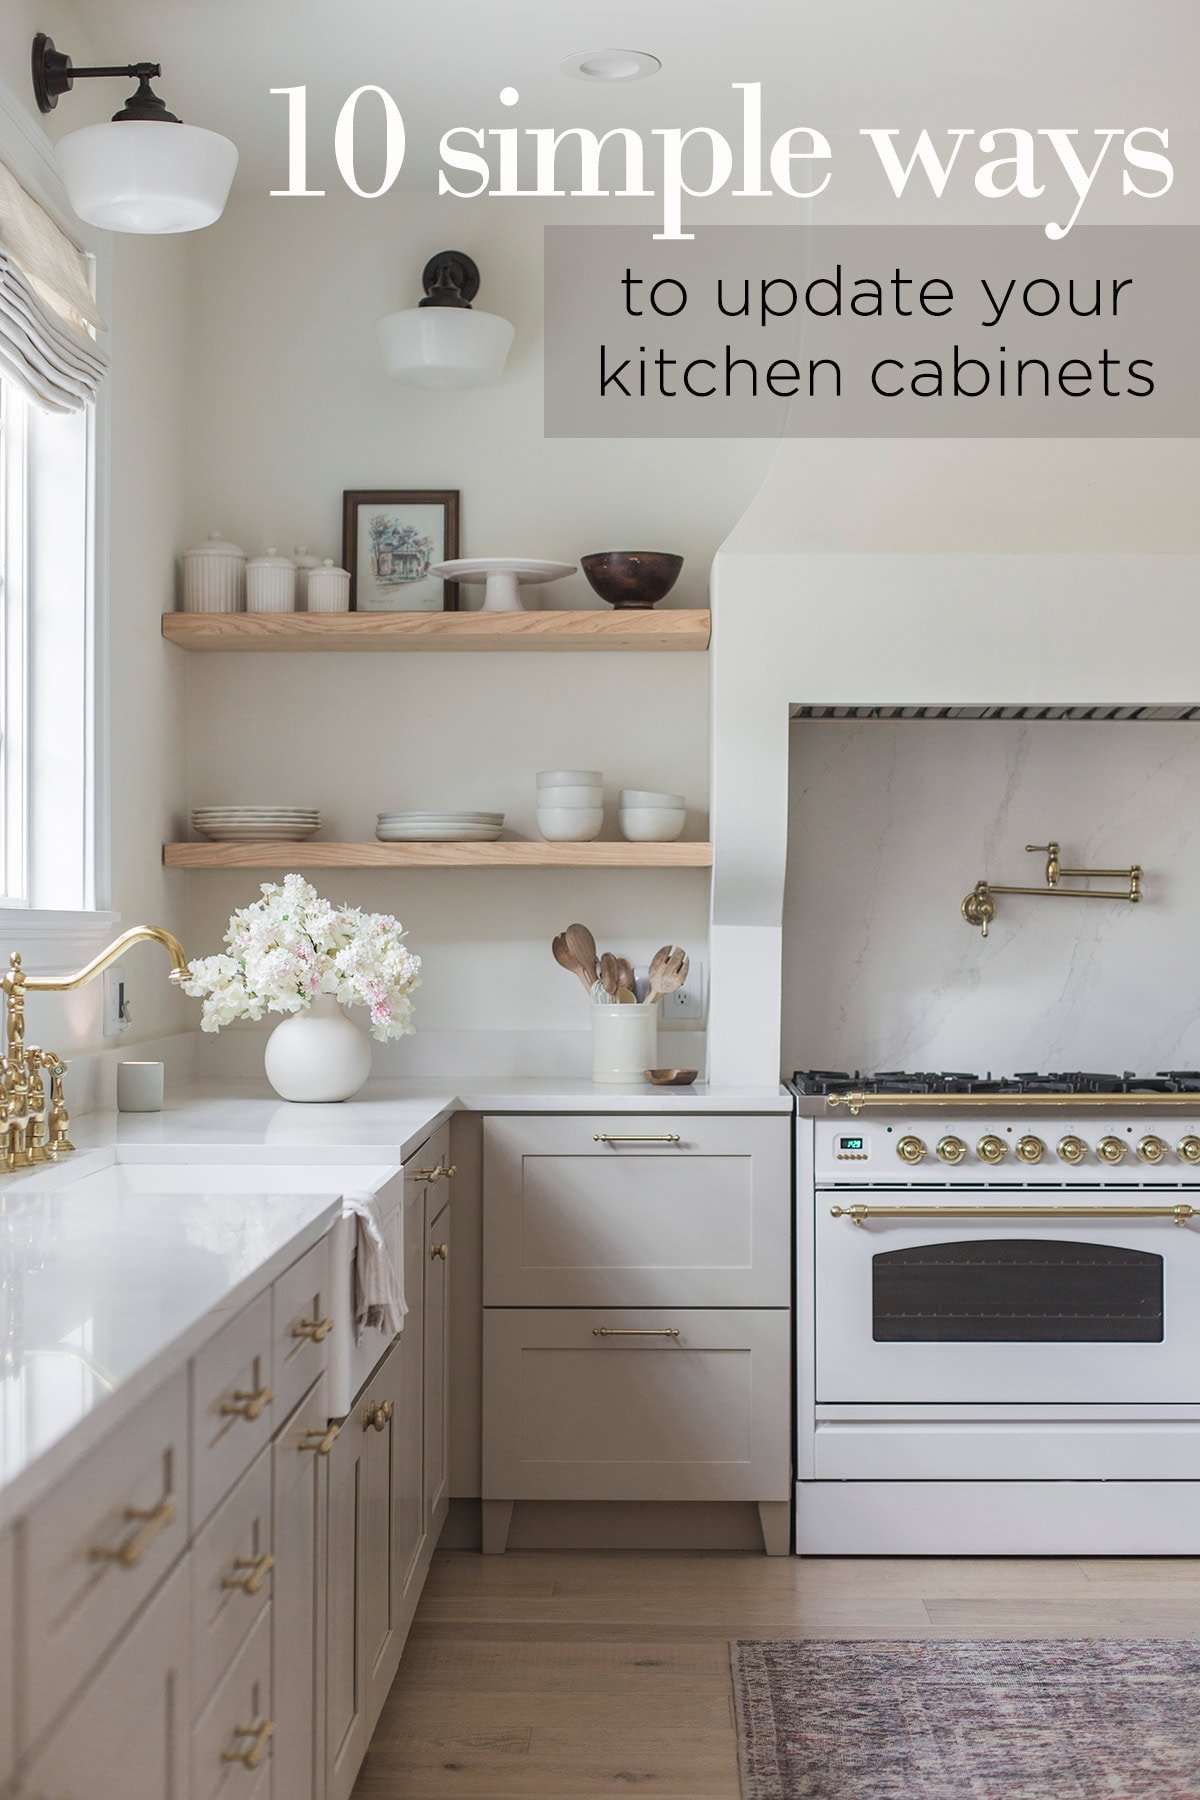 Revamp Your Kitchen with Modern Handle-Less Cabinets